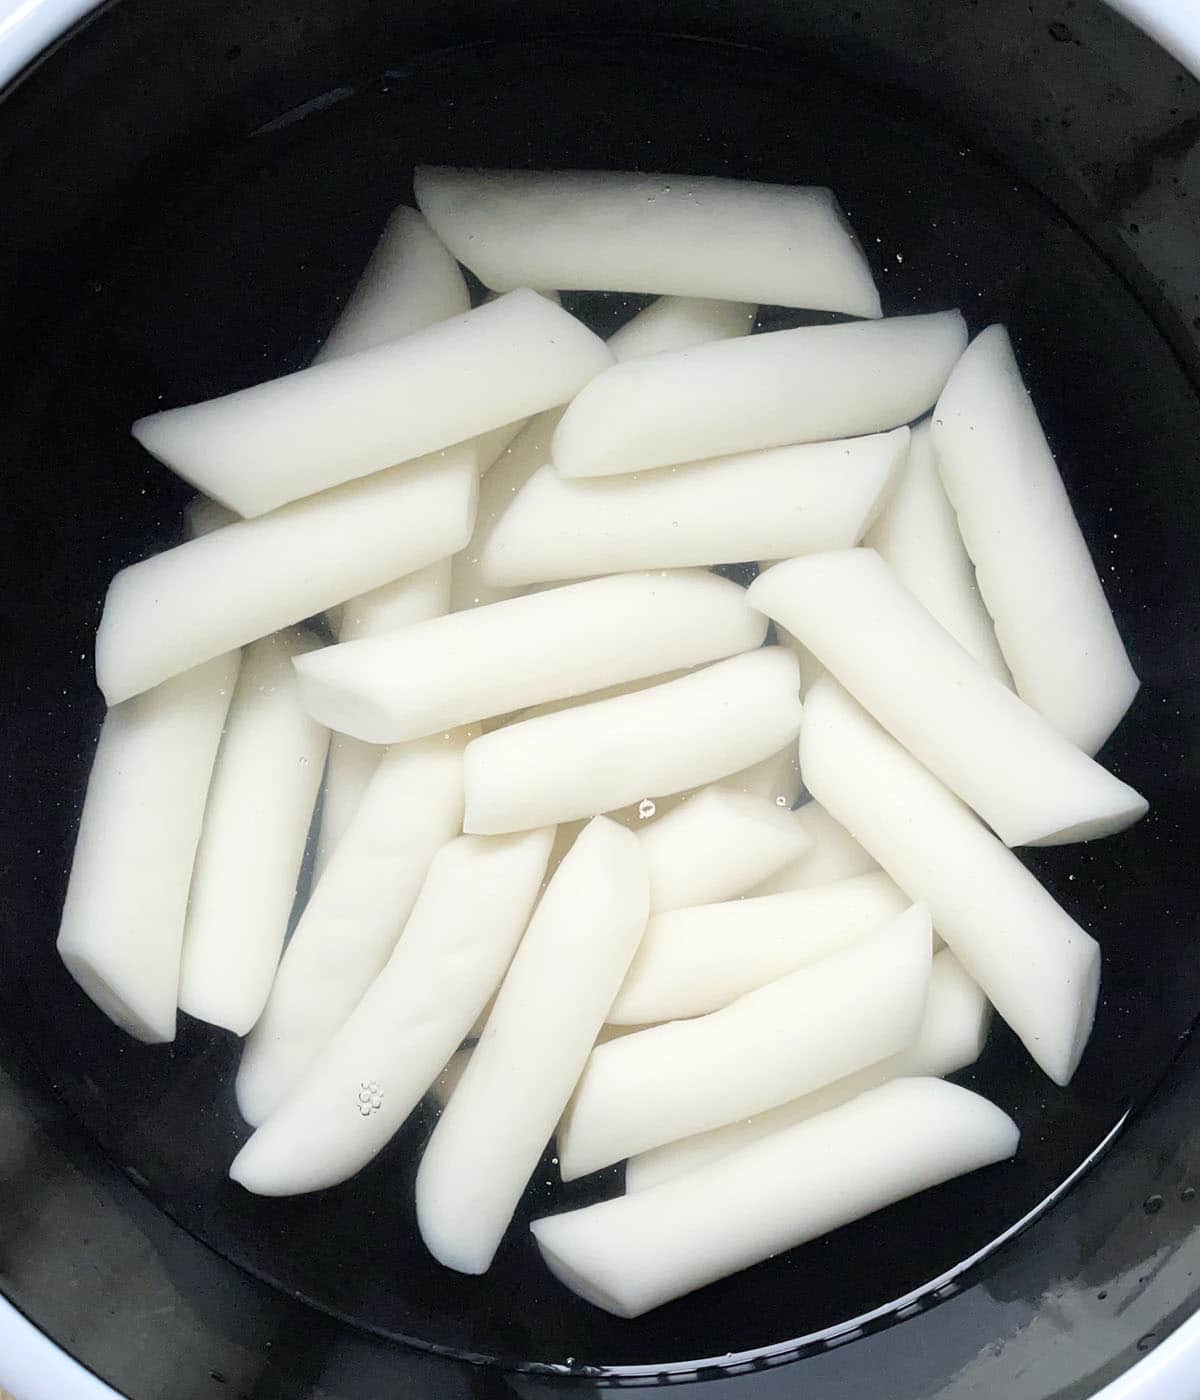 White cylinder shaped rice cakes in water in a black bowl.